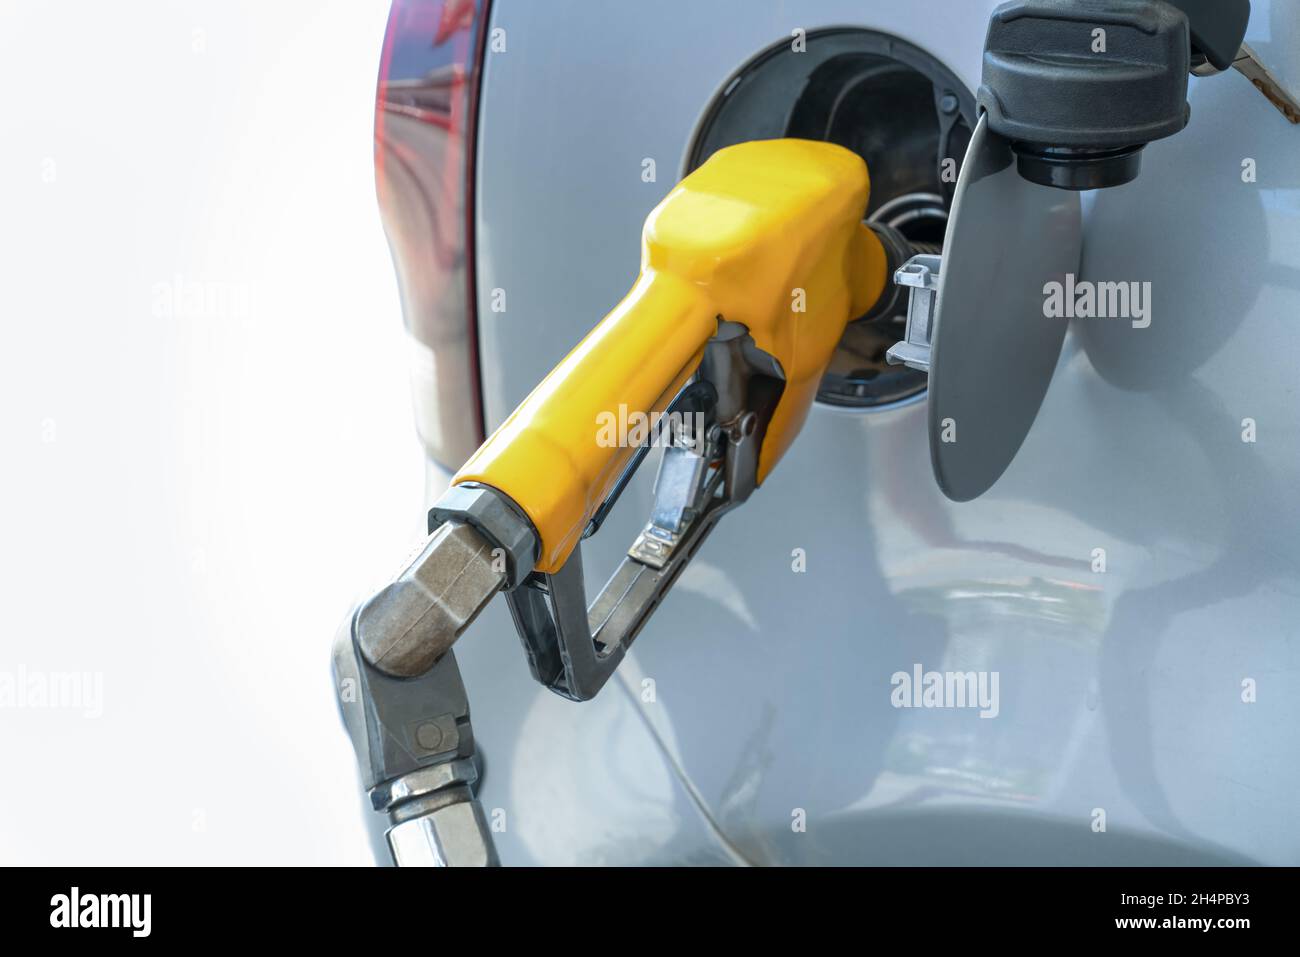 Refueling gun in tank of car, while refueling car with gasoline fuel, at gas station concept of service and fuel. Close-up. Stock Photo